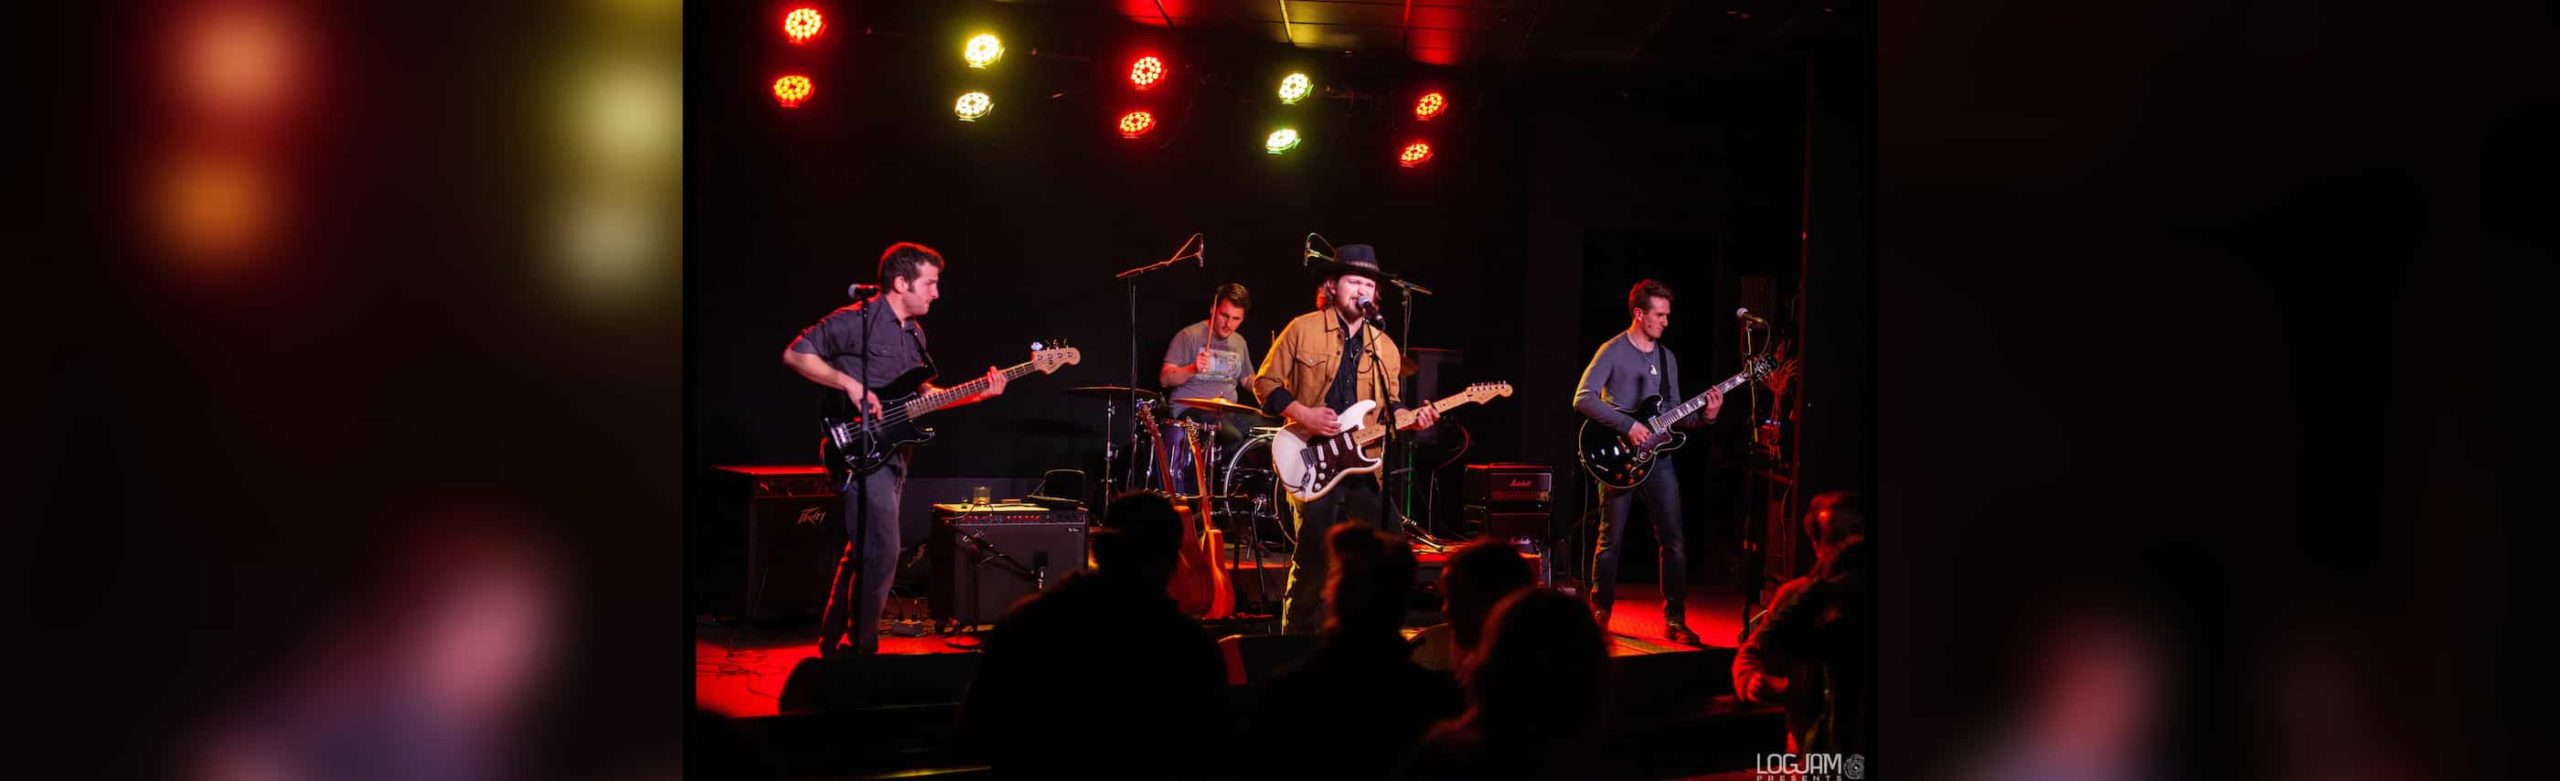 Missoula Rock n’ Roll Band Jackson Holte & the Highway Patrol Will Open for Reckless Kelly Image